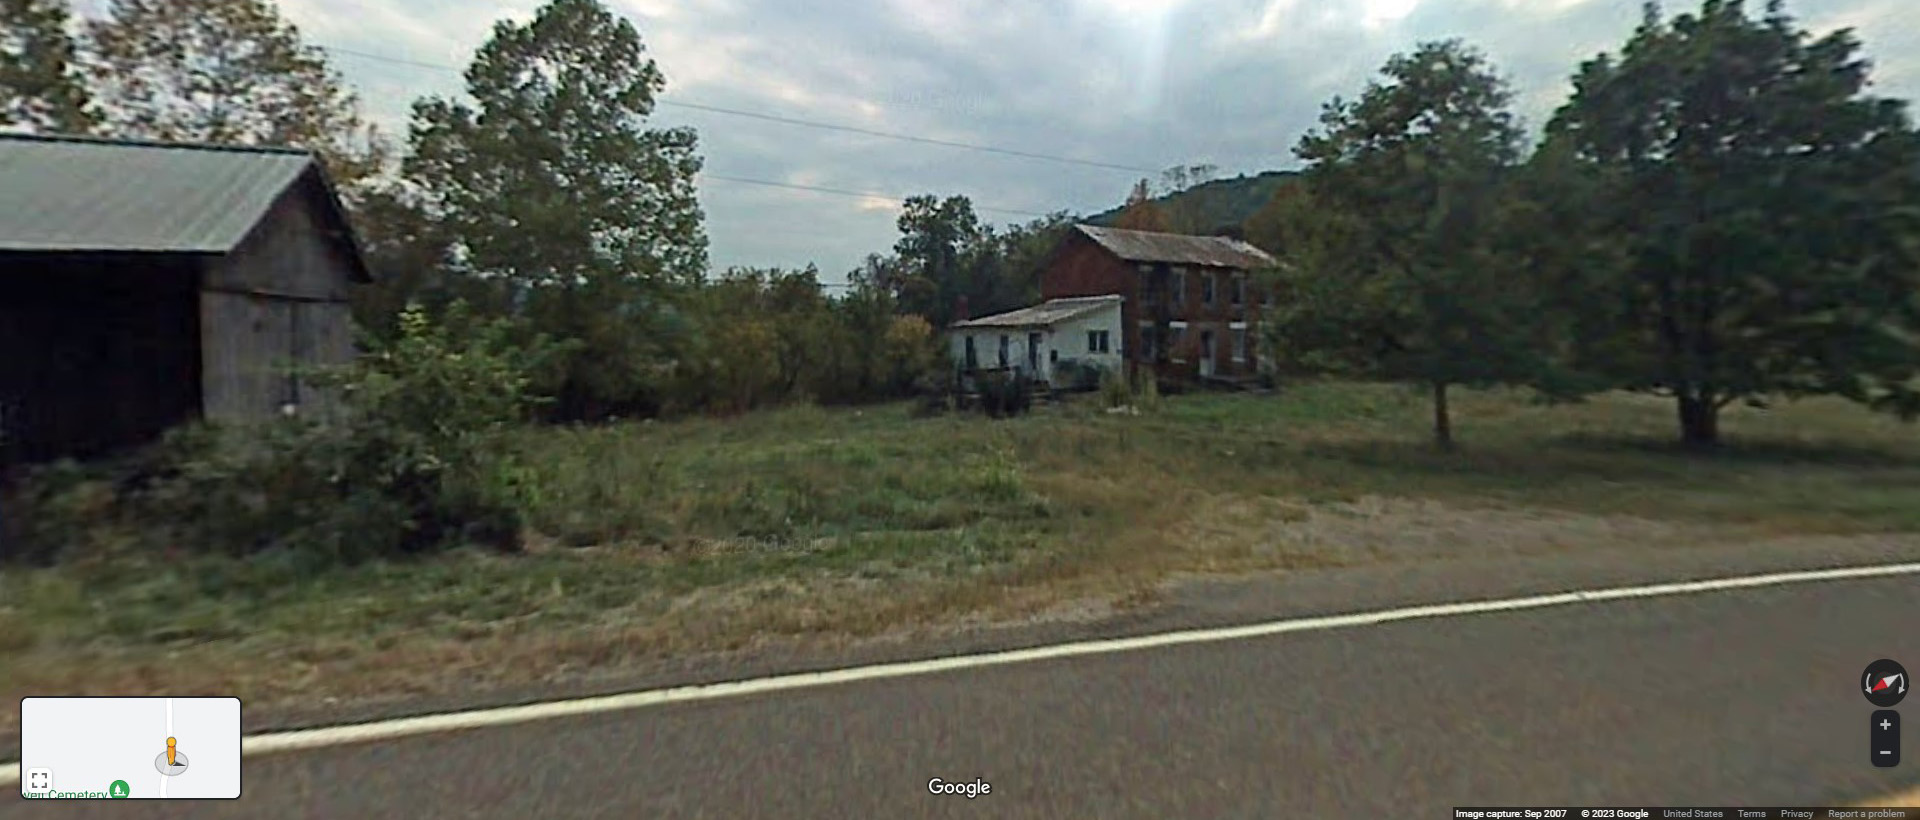 Google Street View image of the Rowell House taken in 2007.